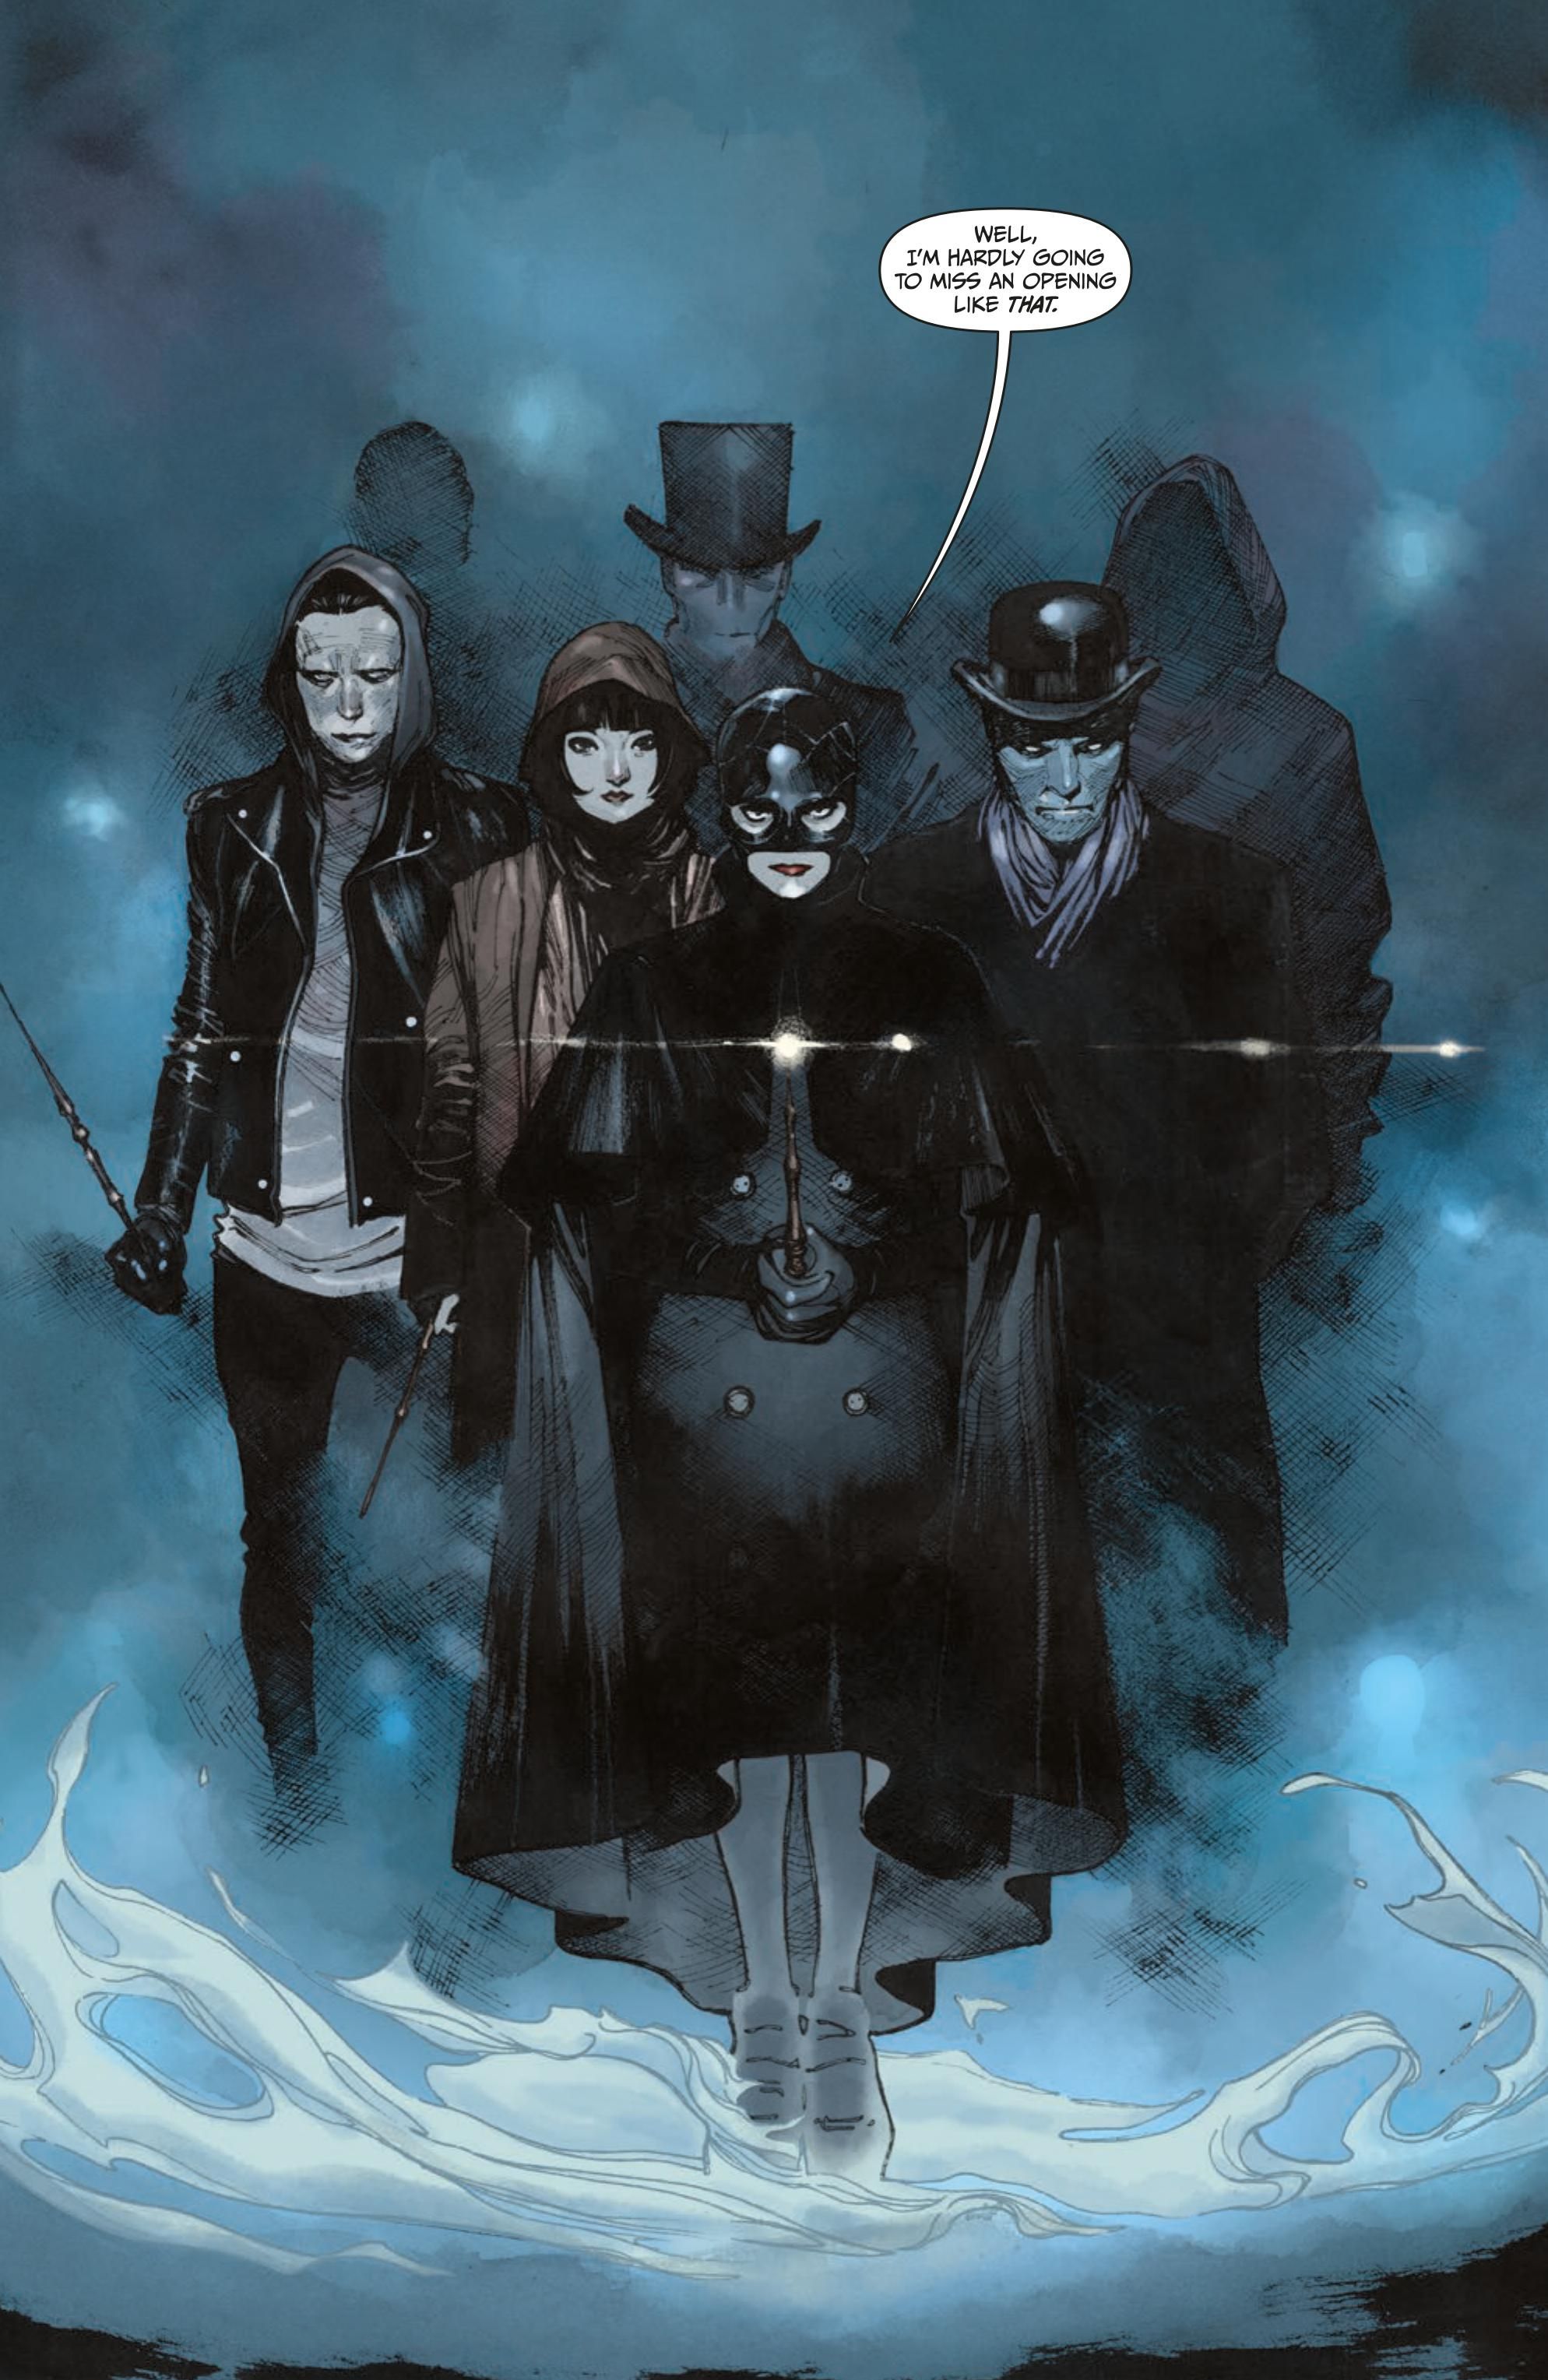 Read ‘The Magic Order’ #1 Now For Free Courtesy of Netflix & Millar [EXCLUSIVE]